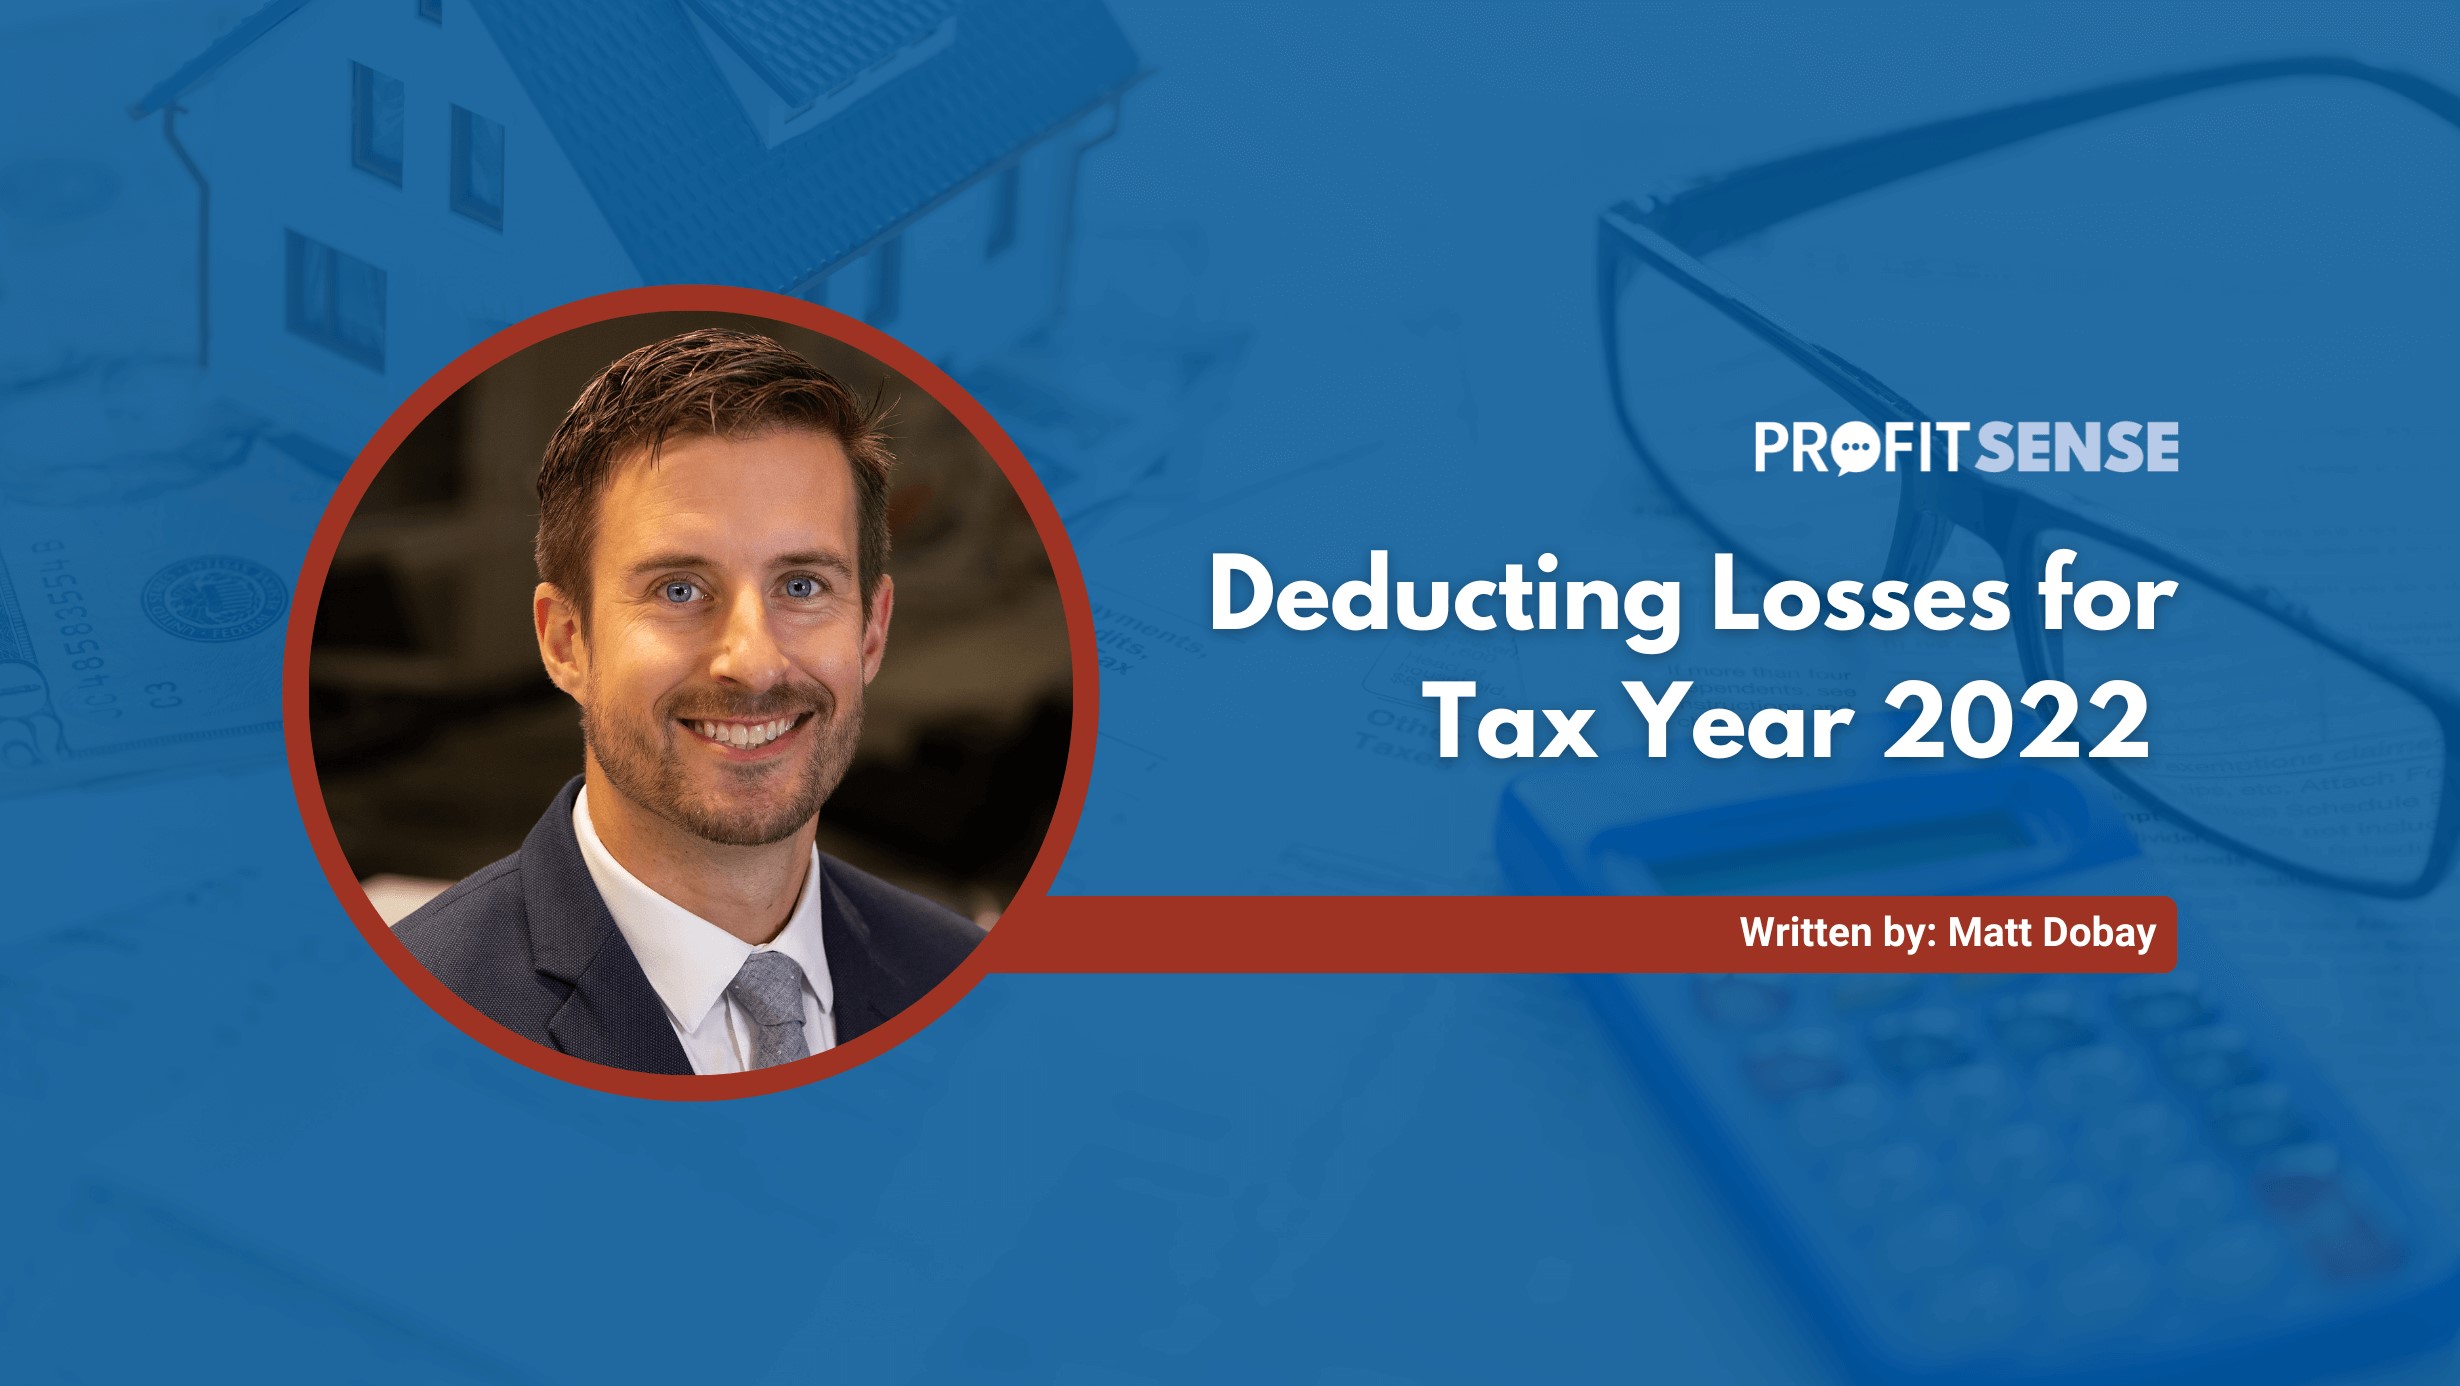 Deducting Losses for Tax Year 2022